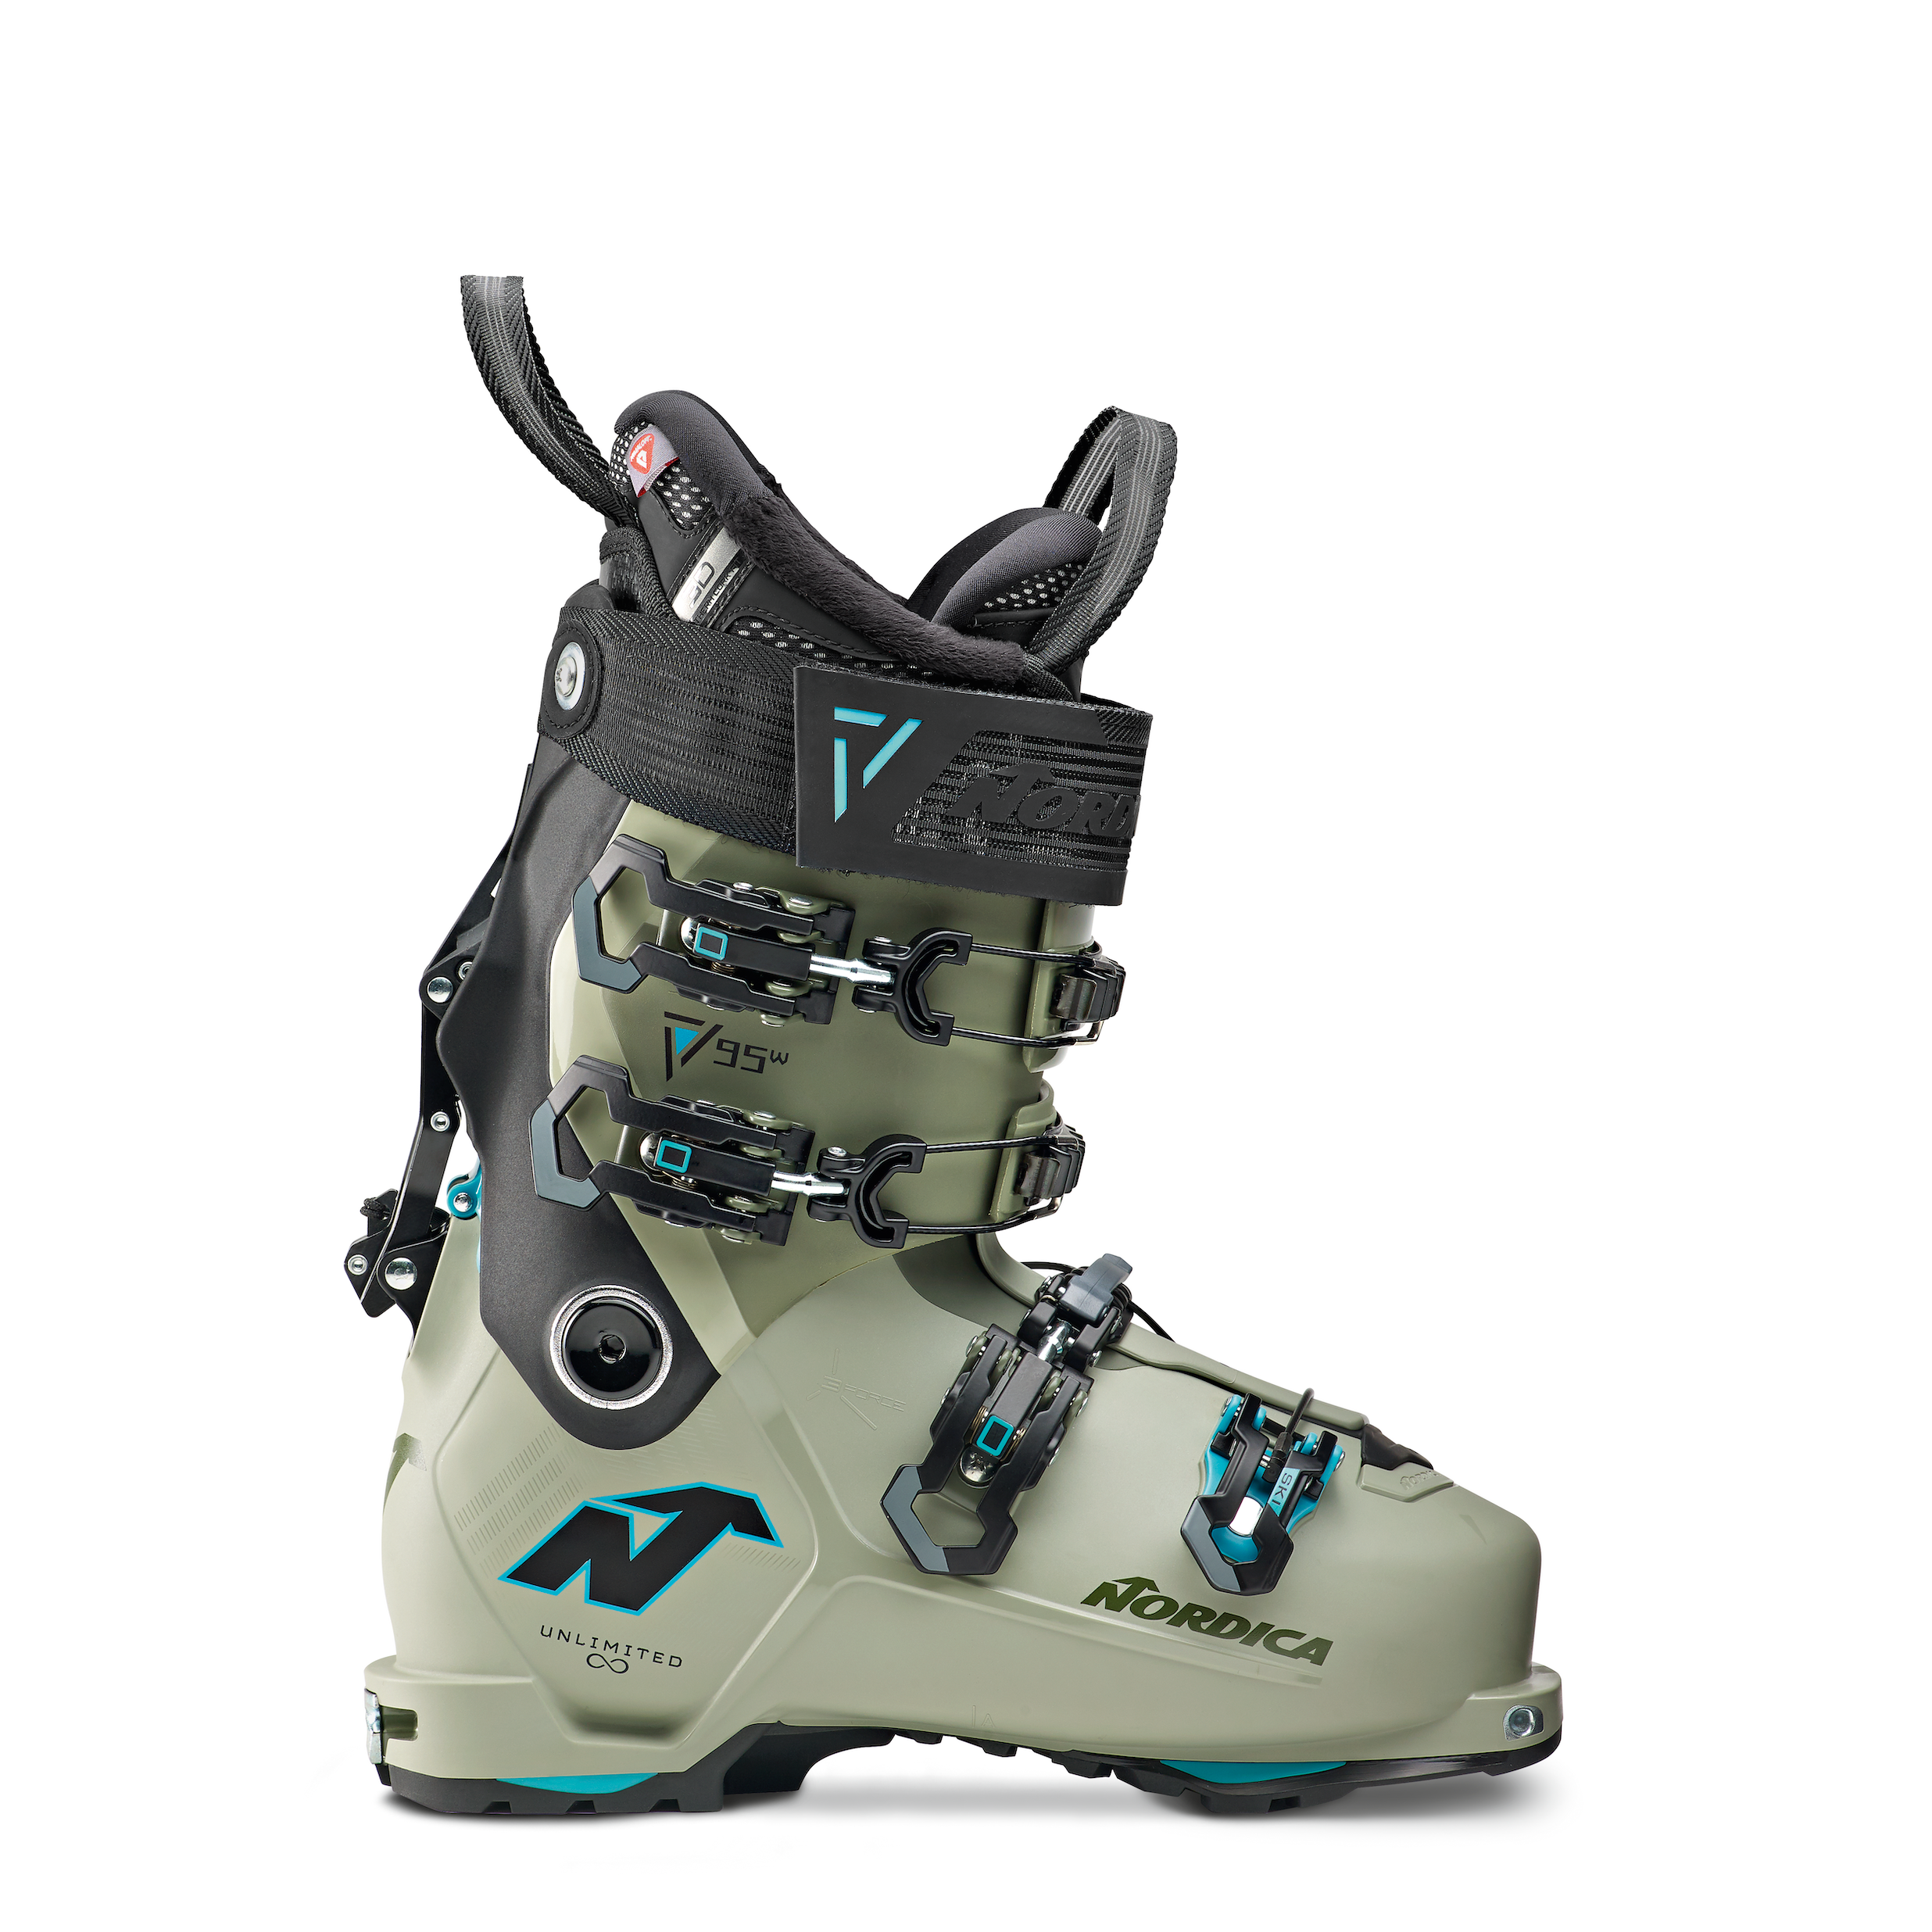 Light green women's Nordica alpine touring ski boot, Unlimited 95 DYN with black and blue accents.